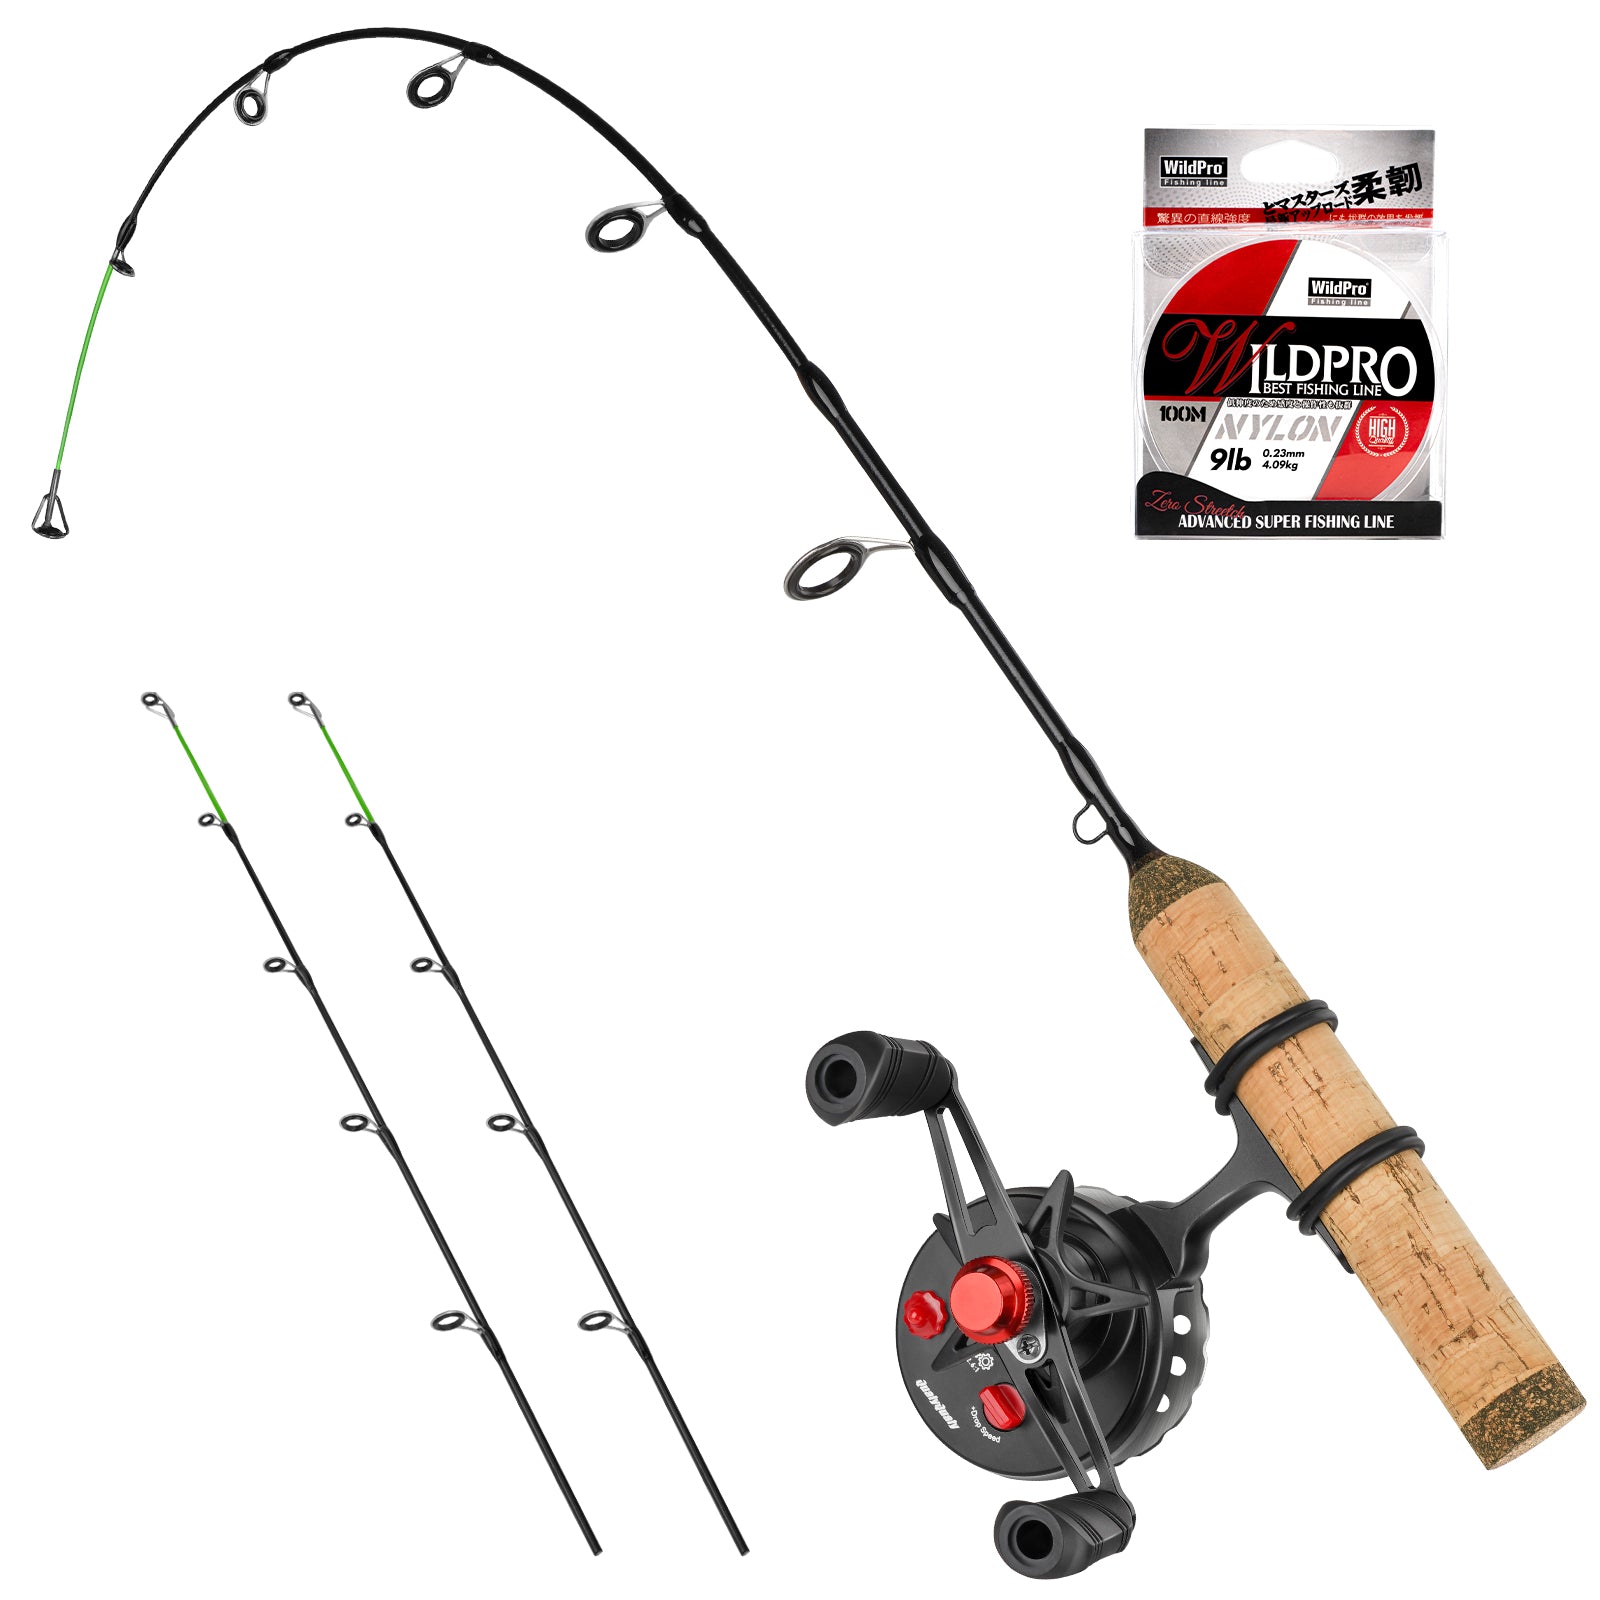  Clearance Fishing Items